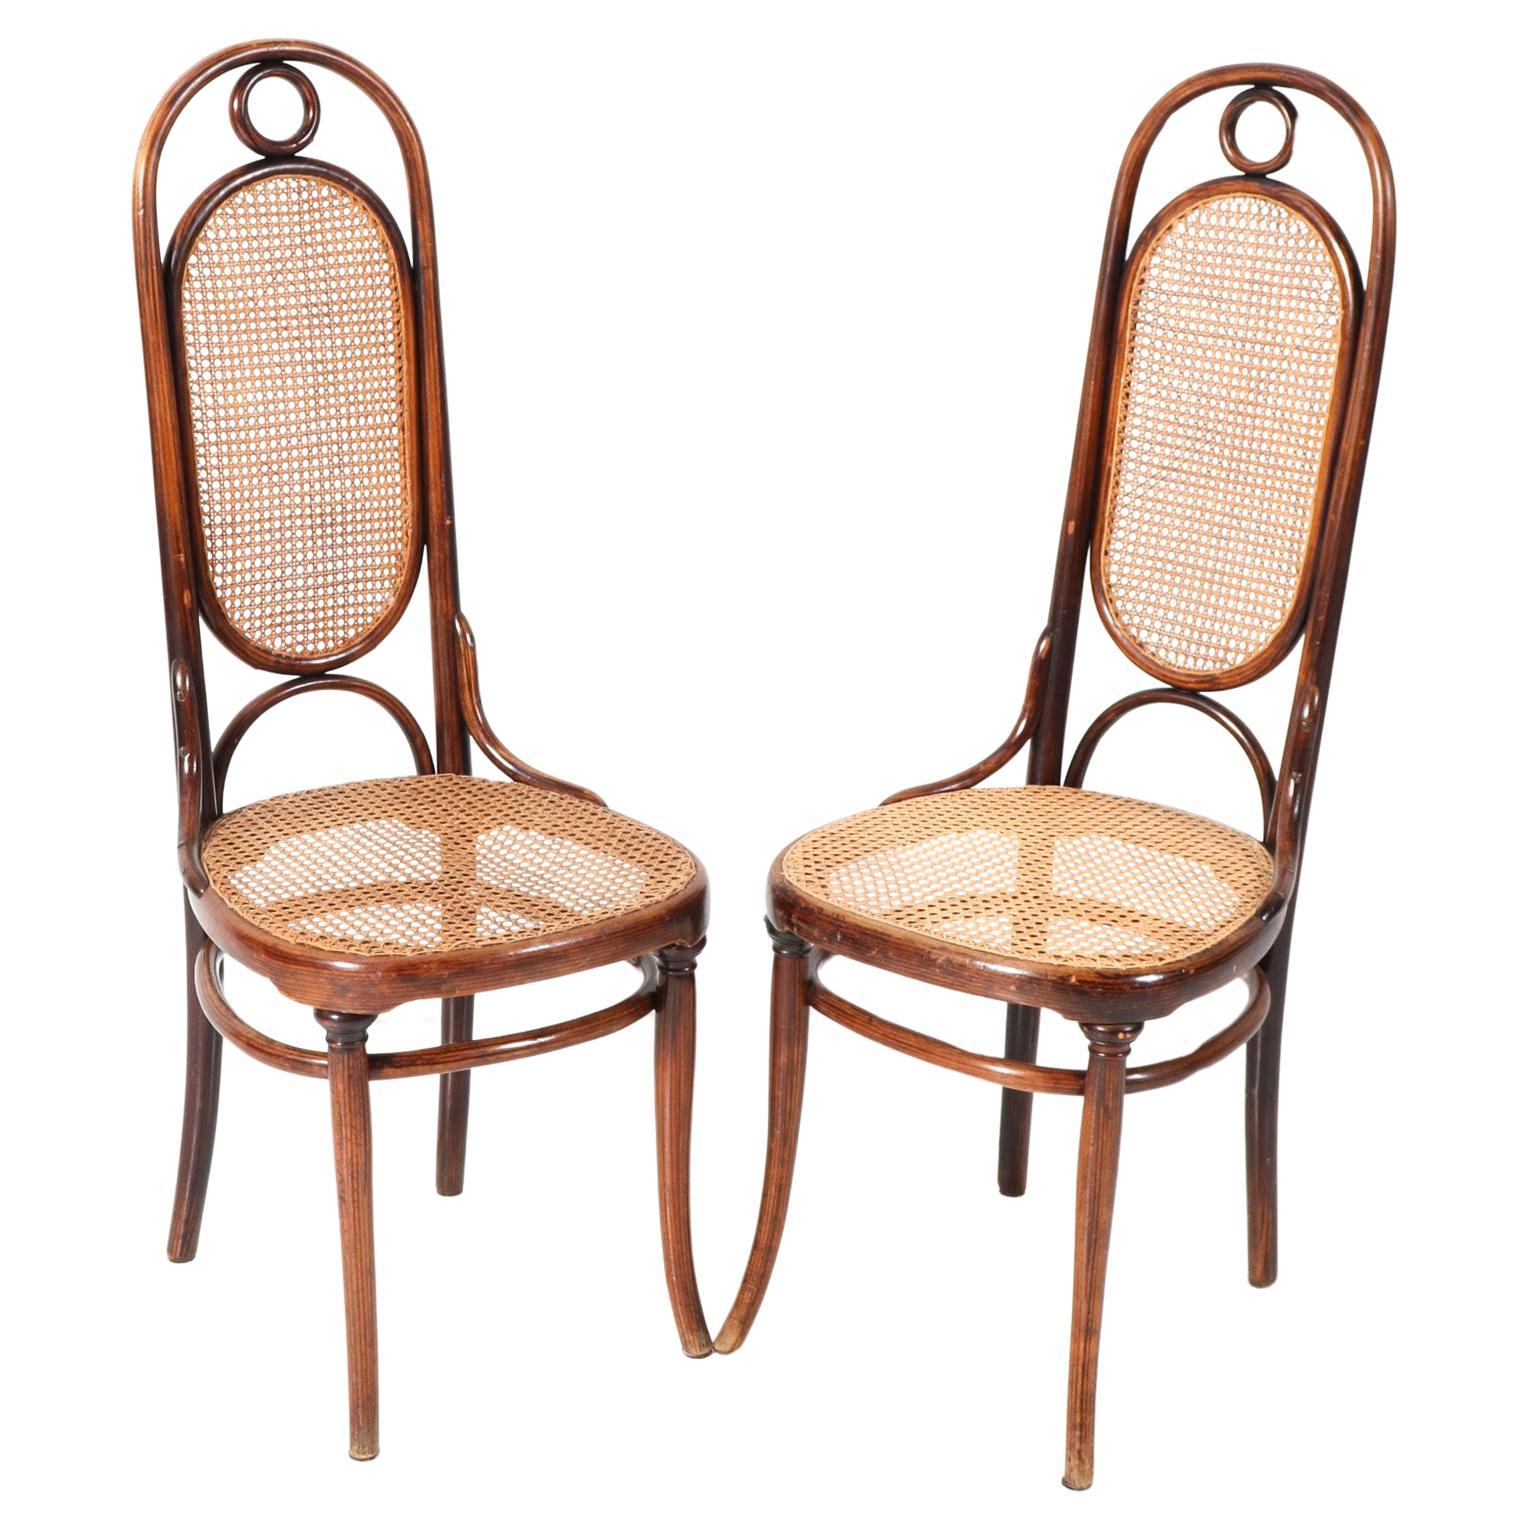 Pair of Beech Art Nouveau High Back Chairs Model 17 by Michael Thonet, 1890s